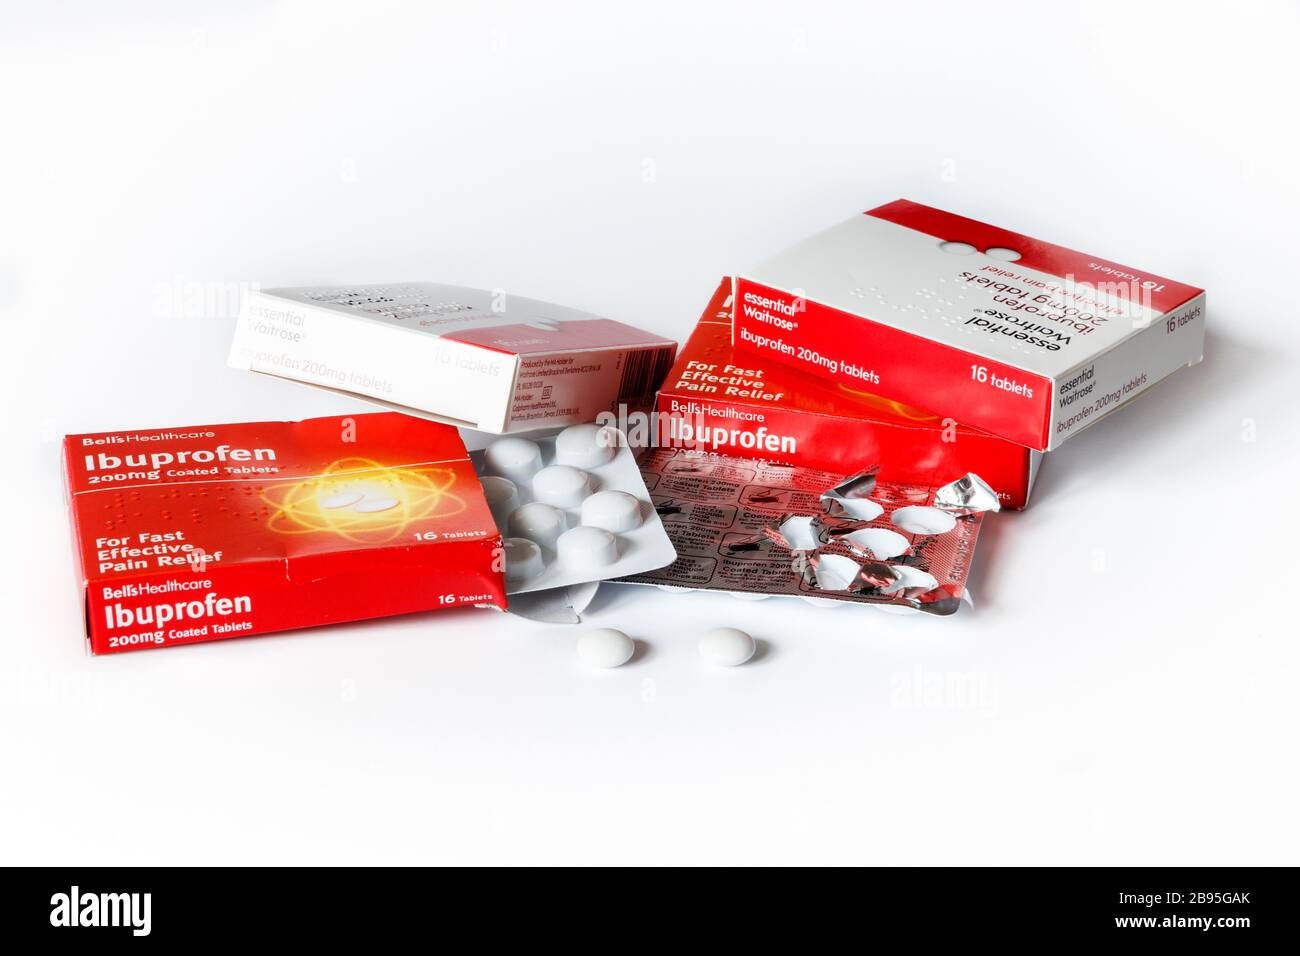 Boxes of ibuprofen tablets and blister packs, two tablets removed, against a plain white background Stock Photo